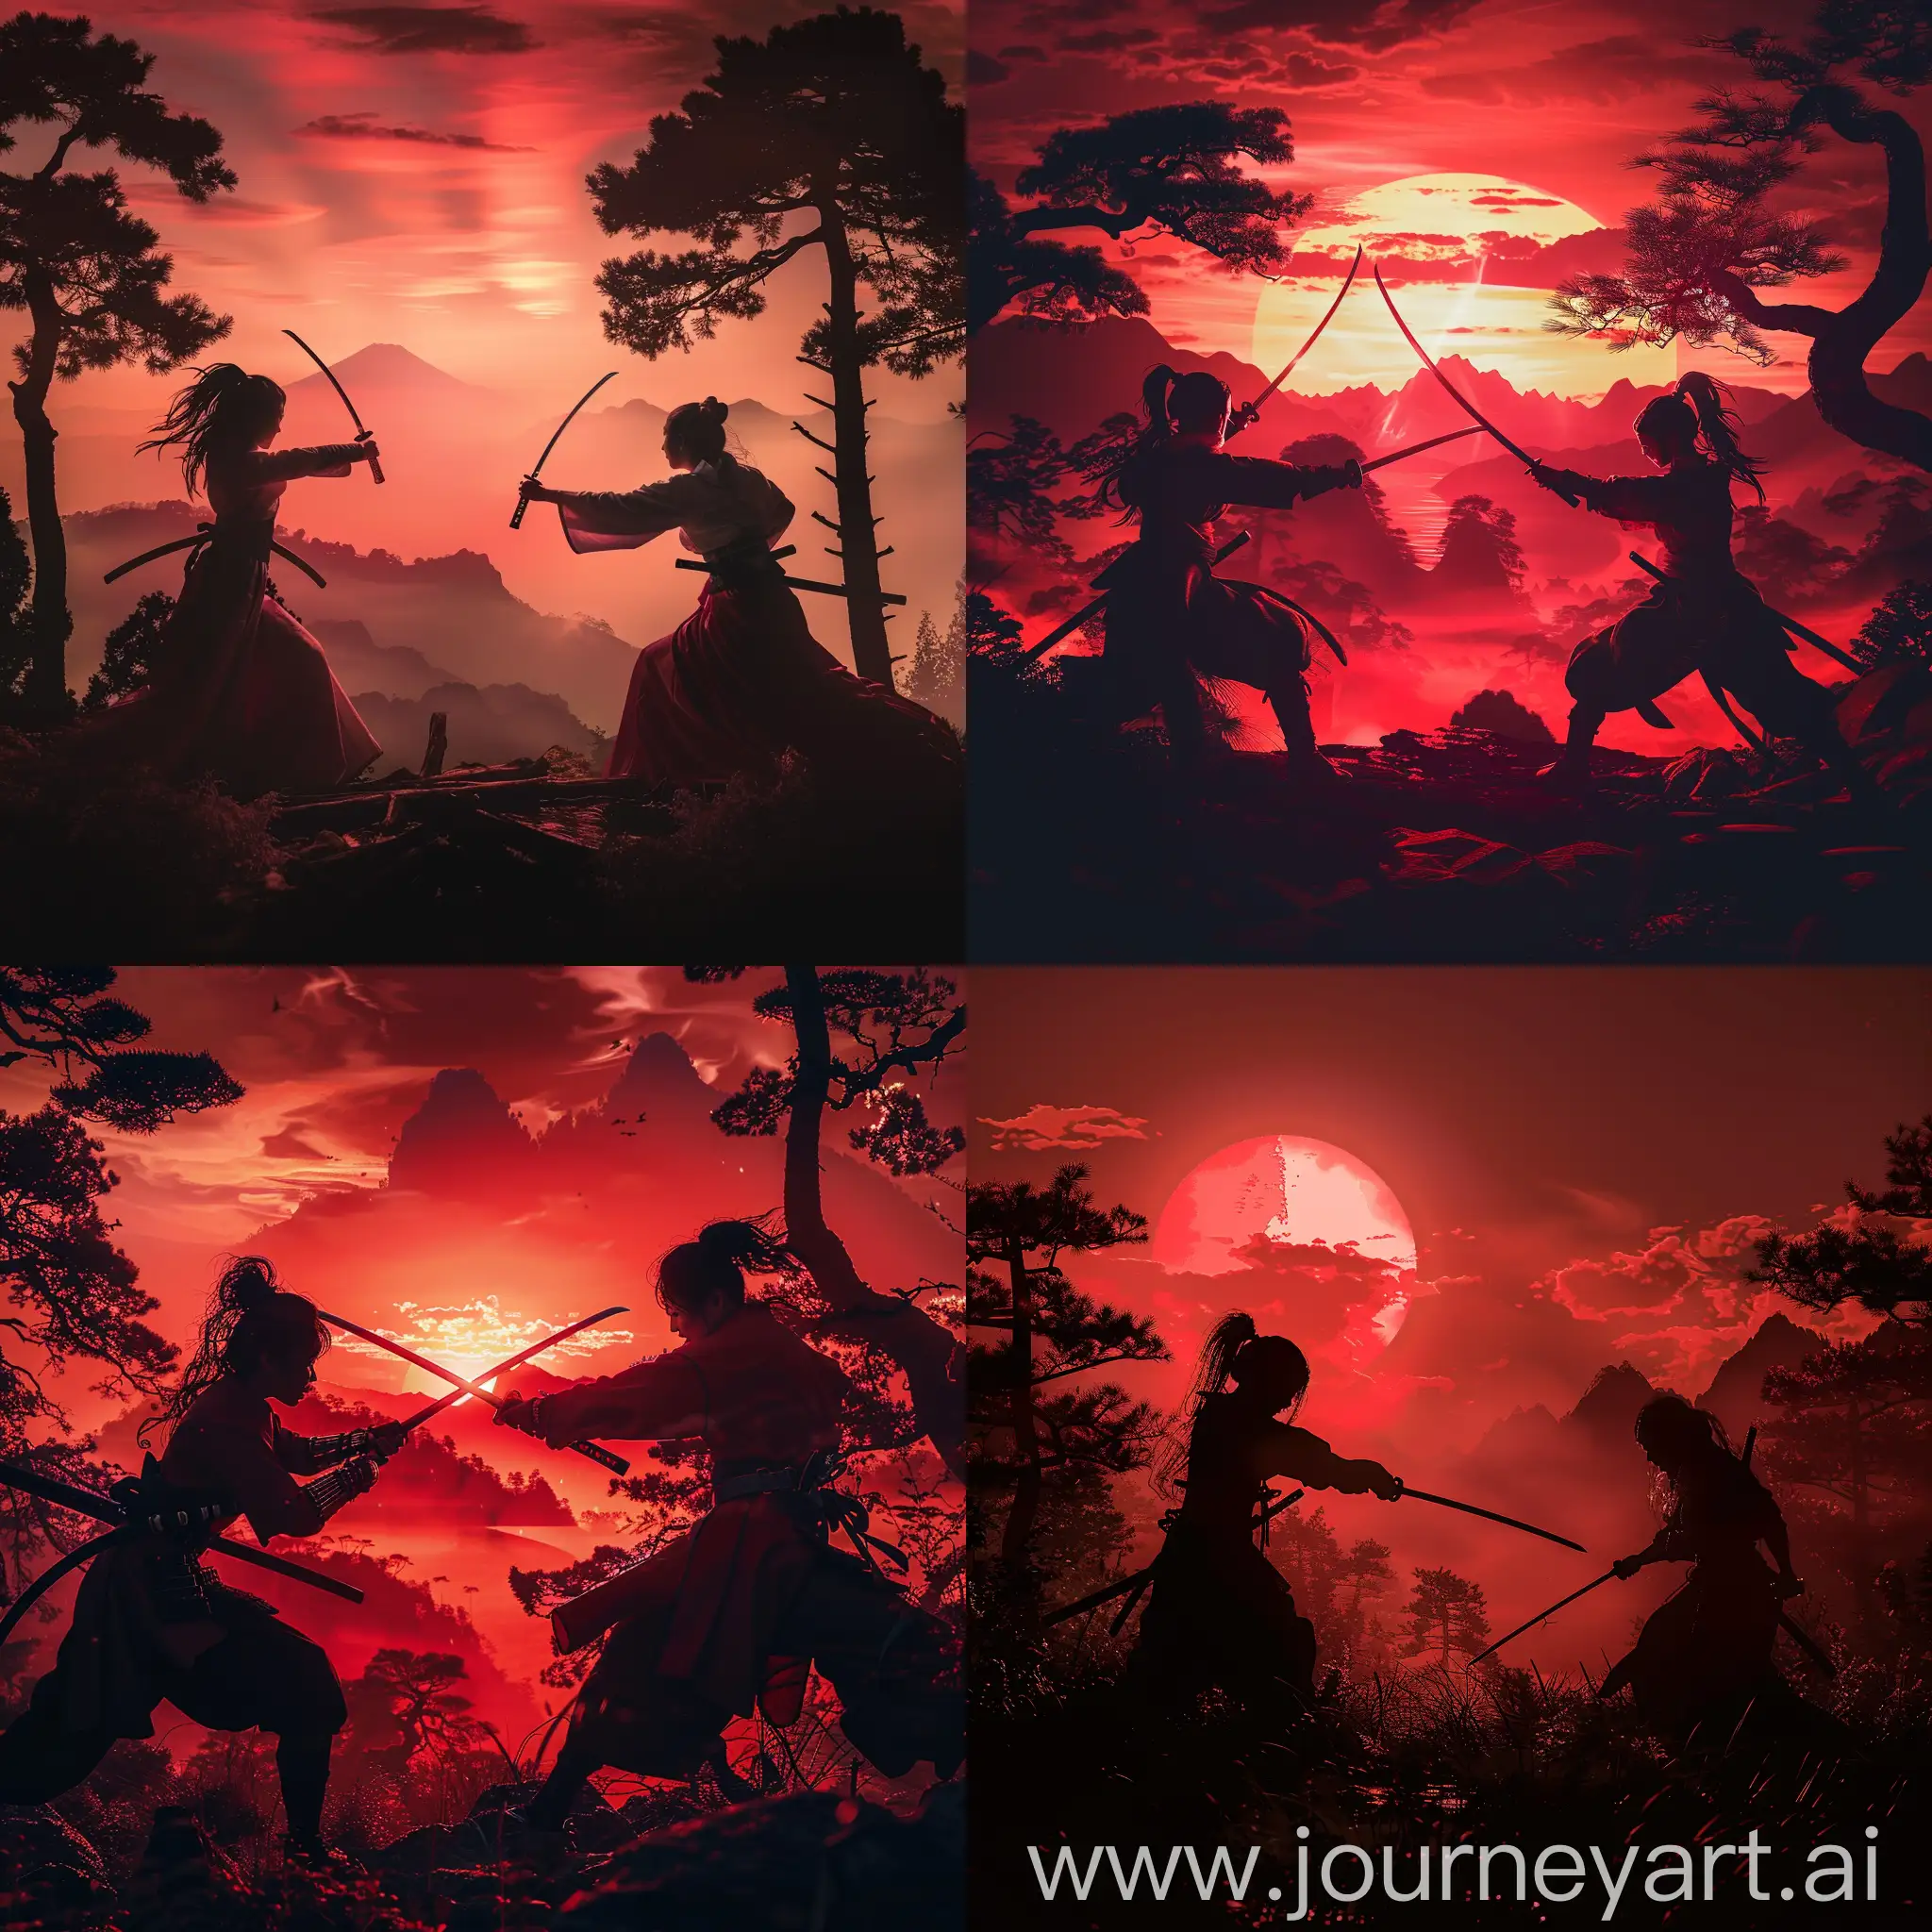 Japanese women samurai sword fight, sunset, silhouettes of mountains and trees, hyperrealistic, mysterious red lighting